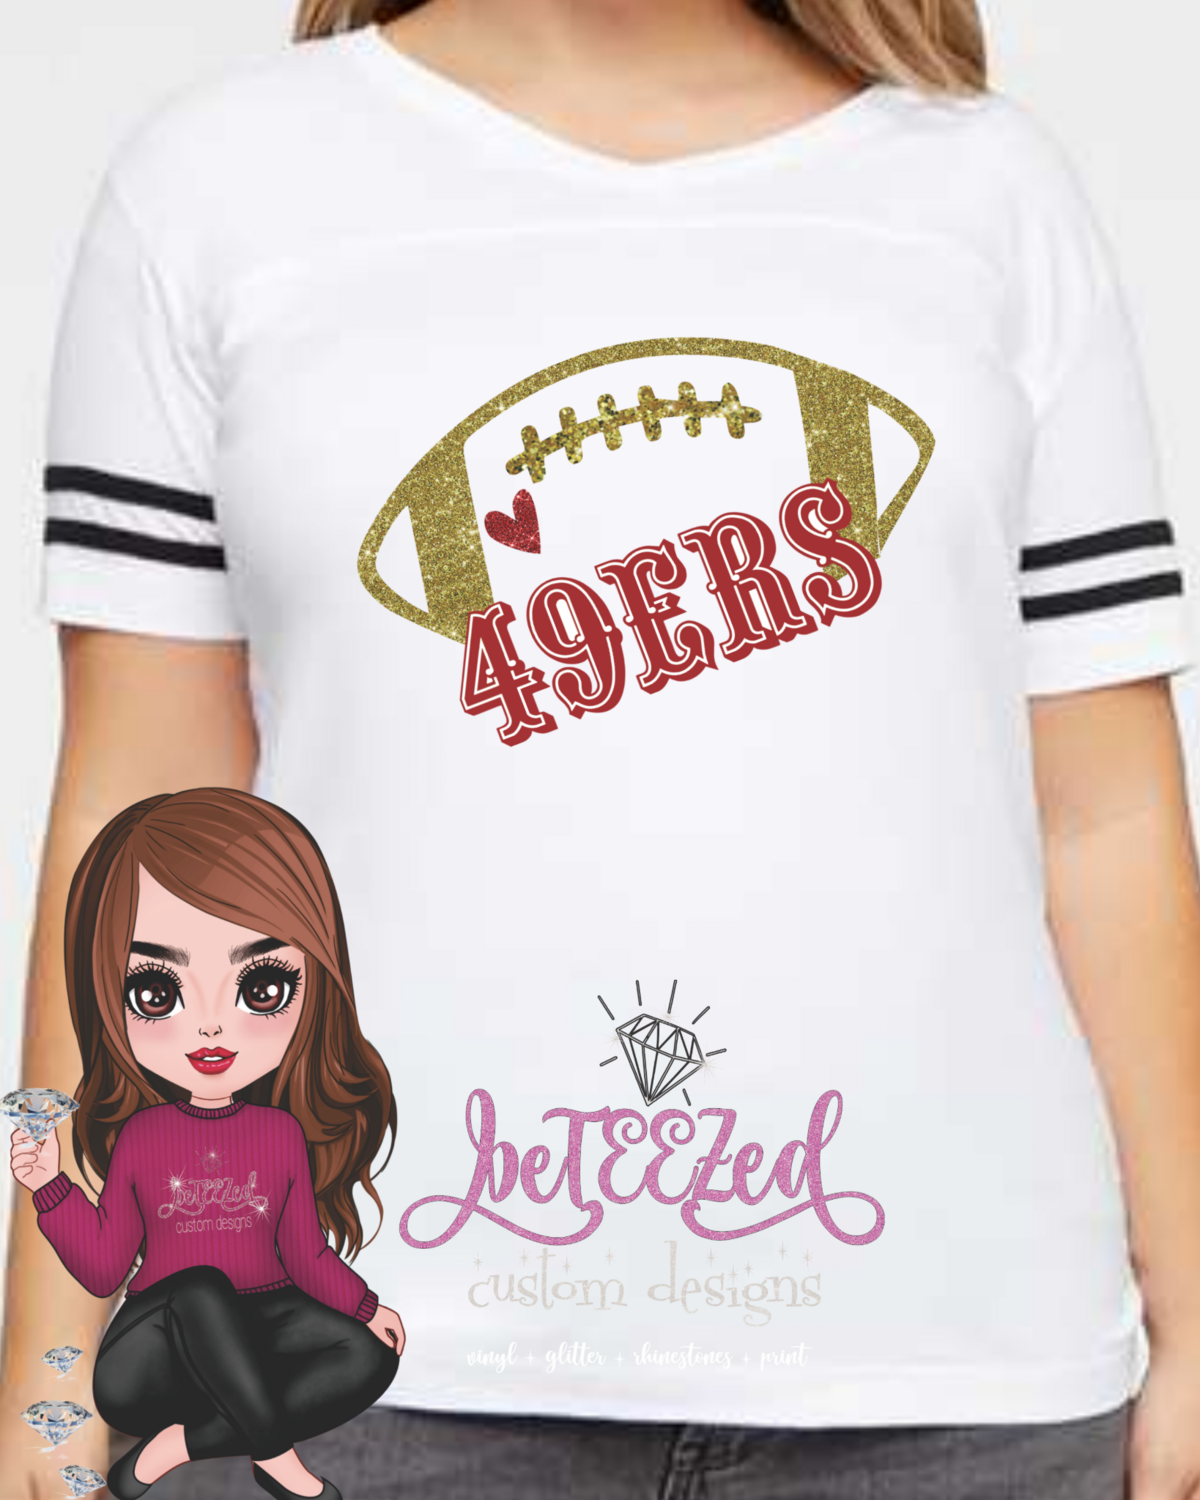  Football Designs -Customized w/your team